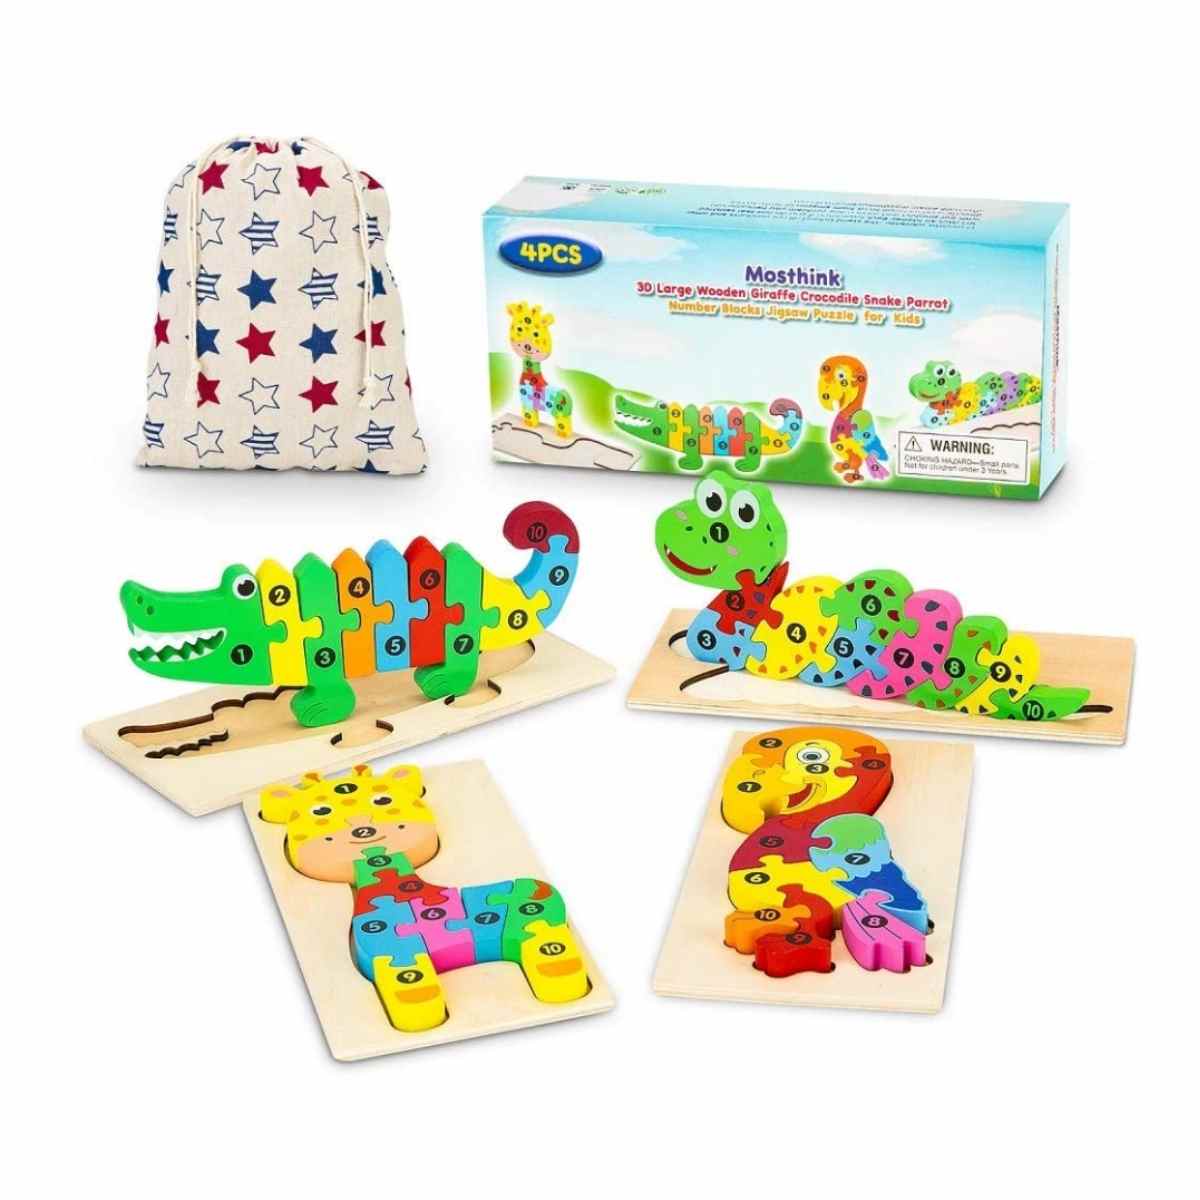 Mosthink Wooden Jigsaw Puzzles